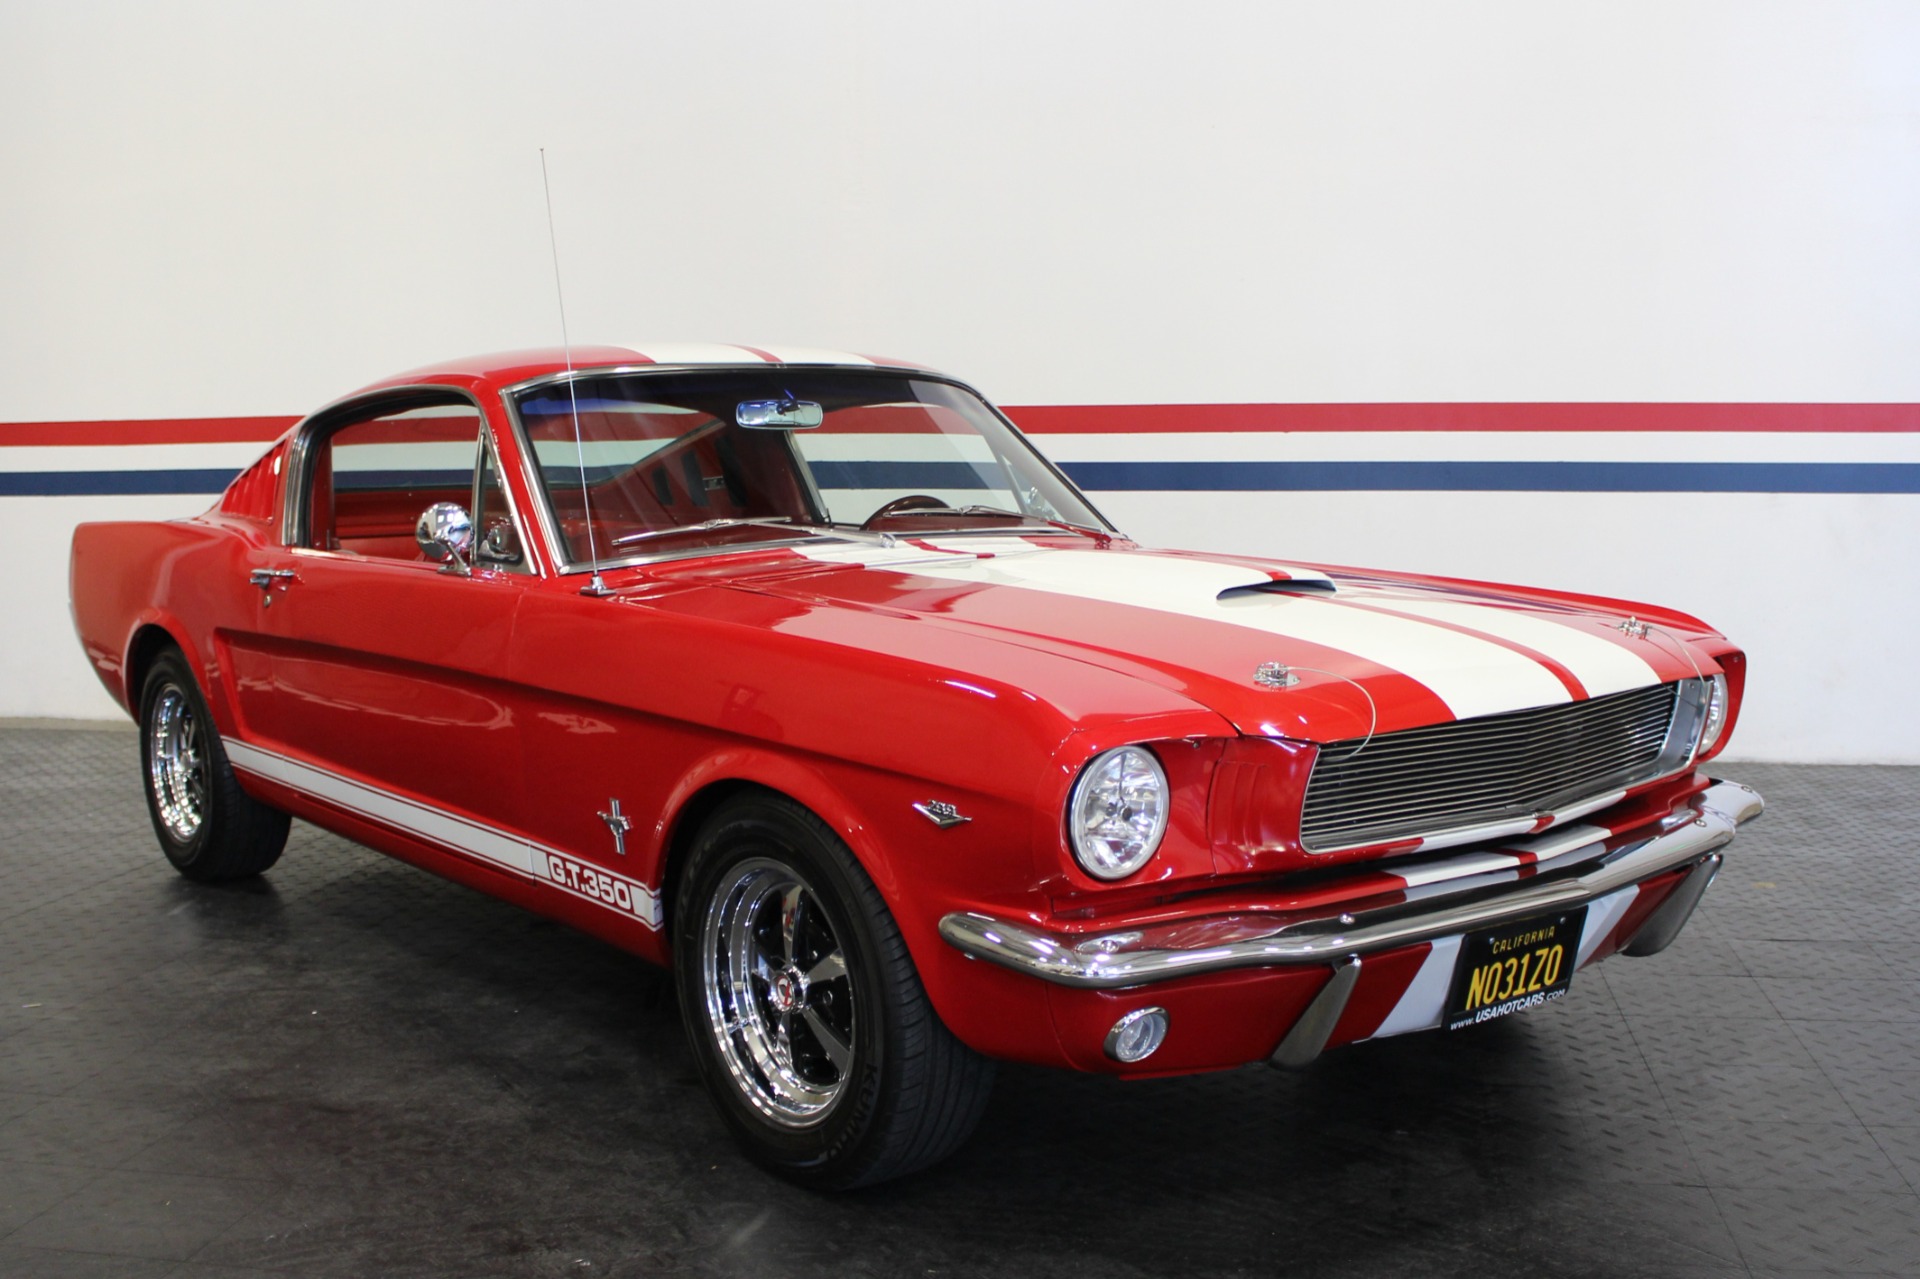 Used-1965-Ford-Mustang-Fastback